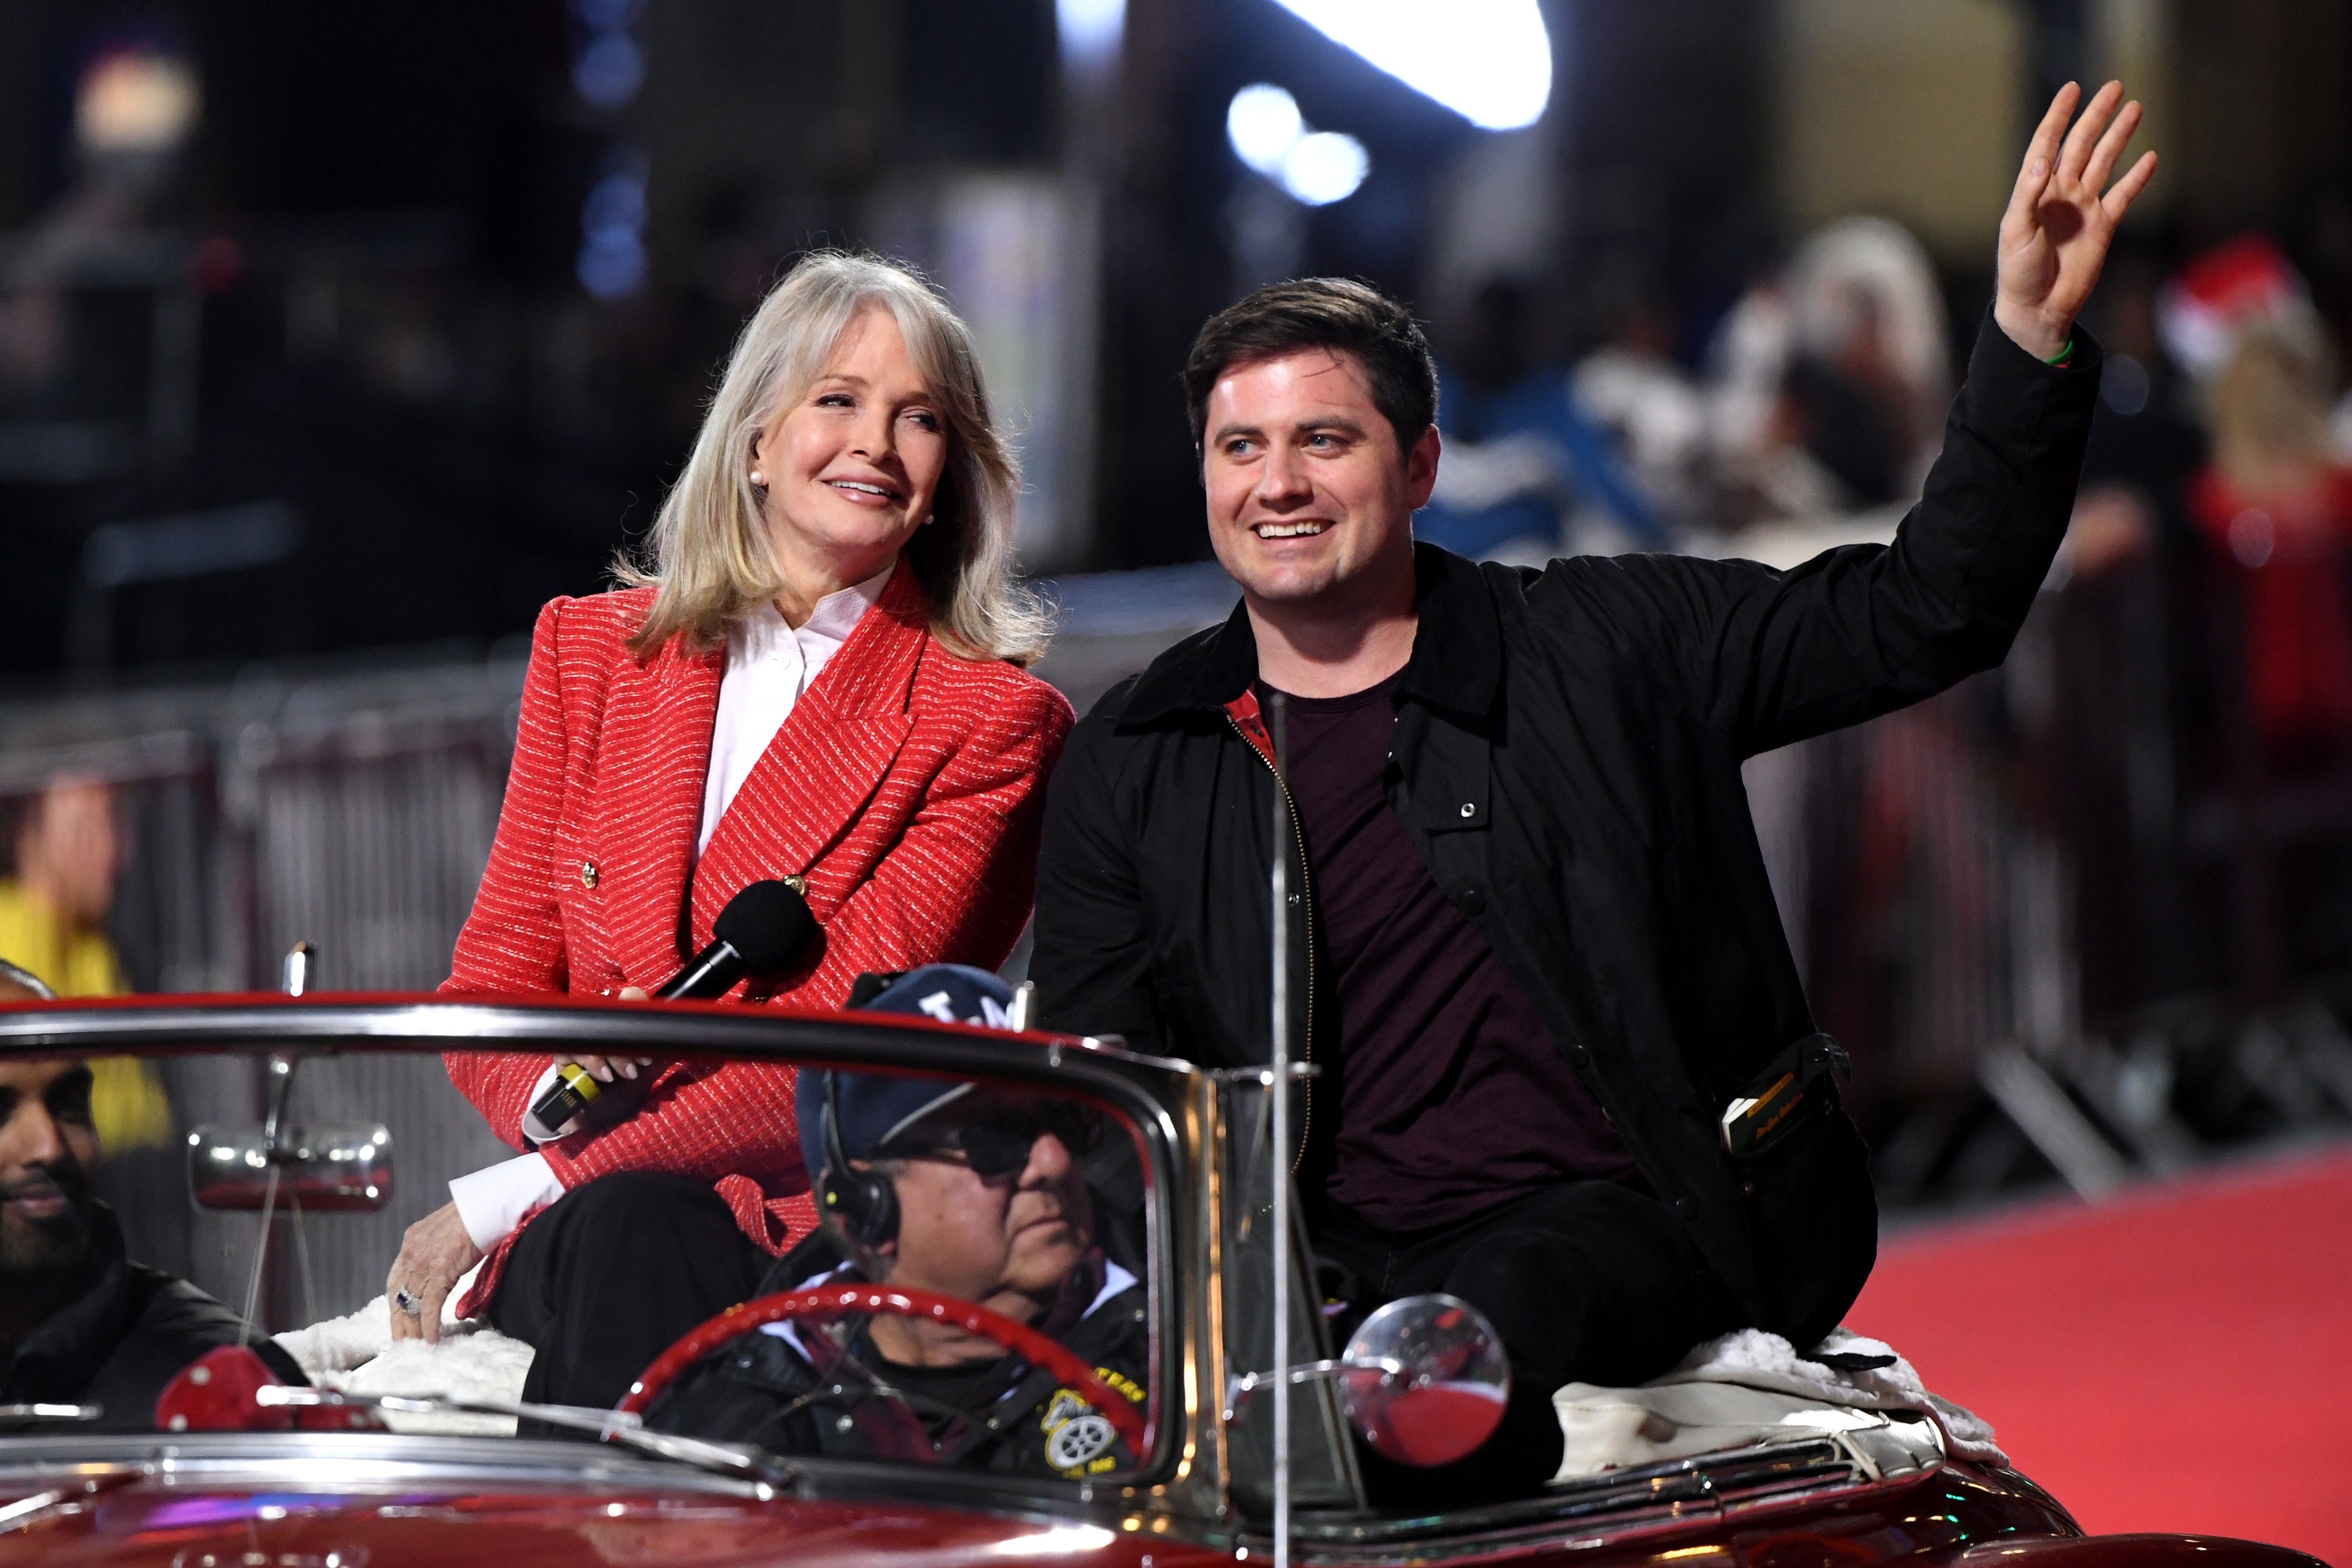 Deidre Hall and her child David Sohmer during the 90th Anniversary of The Hollywood Christmas Parade on November 27, 2022 in Hollywood, California ┃Source: Getty Images